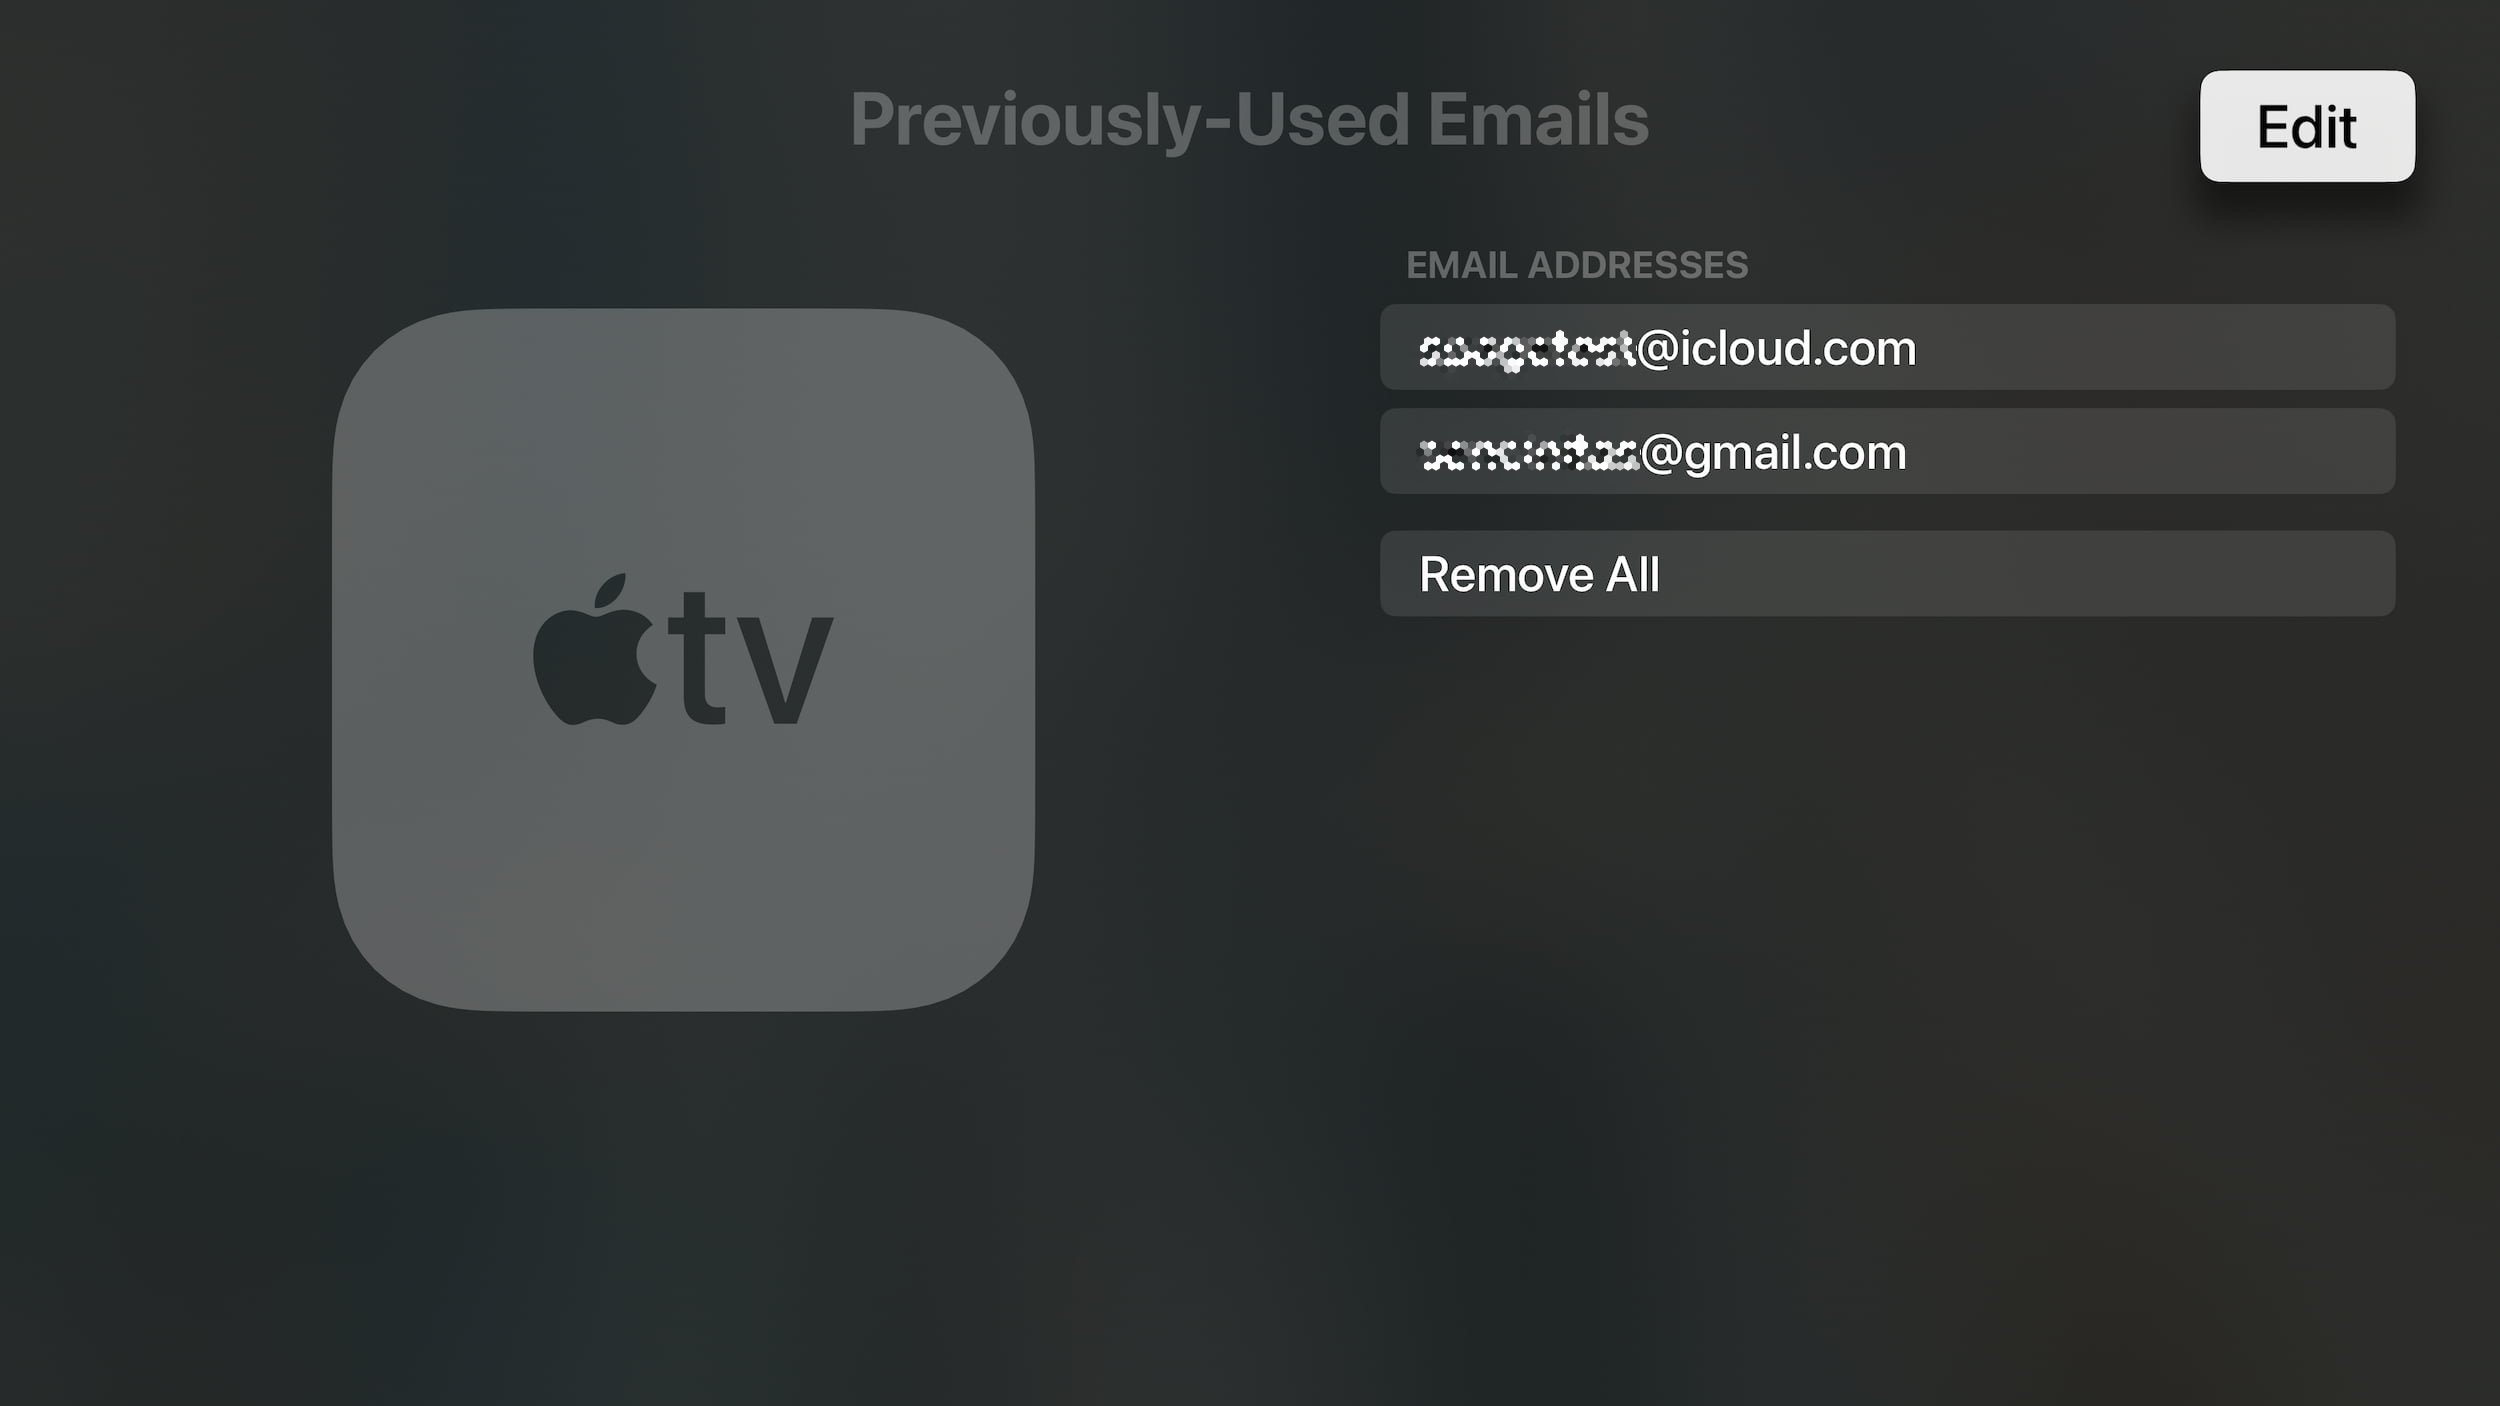 How to previously-used Apple IDs and emails Apple TV